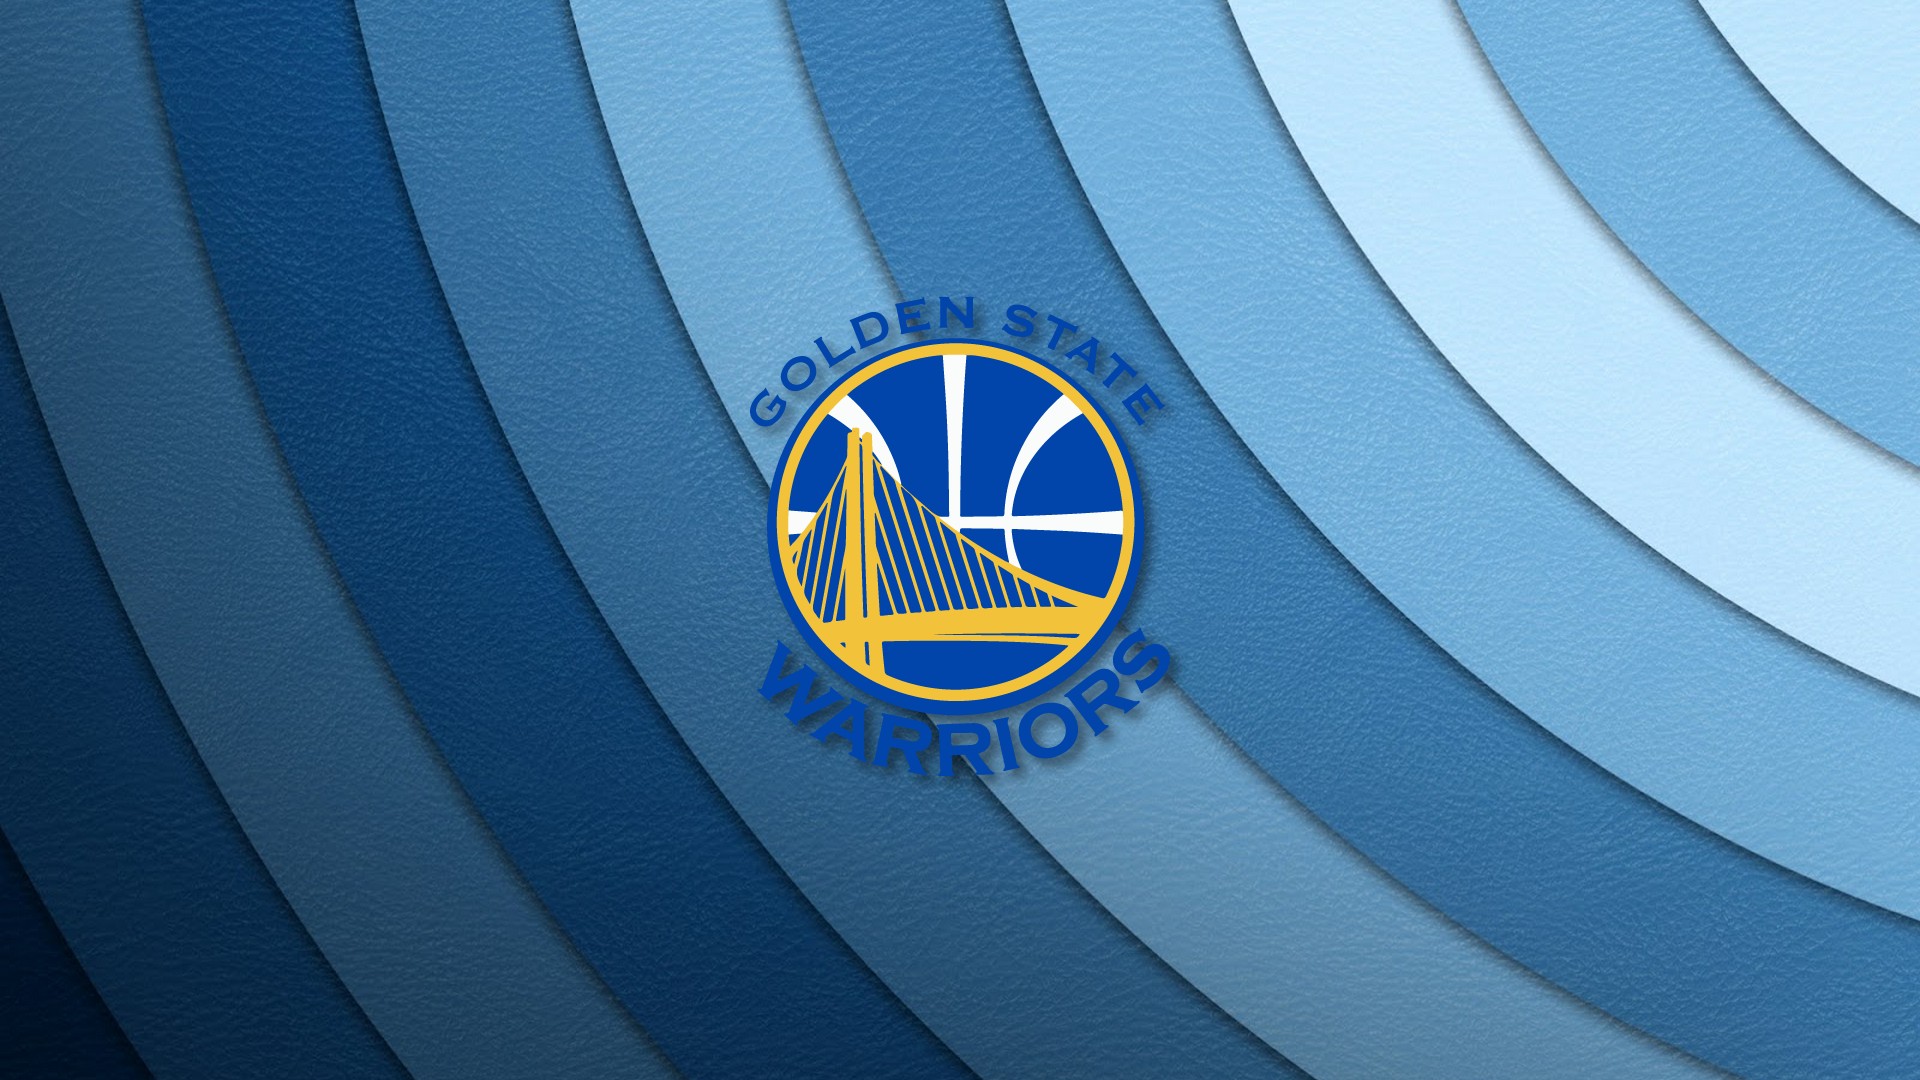 Wallpaper HD Golden State Warriors With Resolution 1920X1080 pixel. You can make this wallpaper for your Desktop Computer Backgrounds, Mac Wallpapers, Android Lock screen or iPhone Screensavers